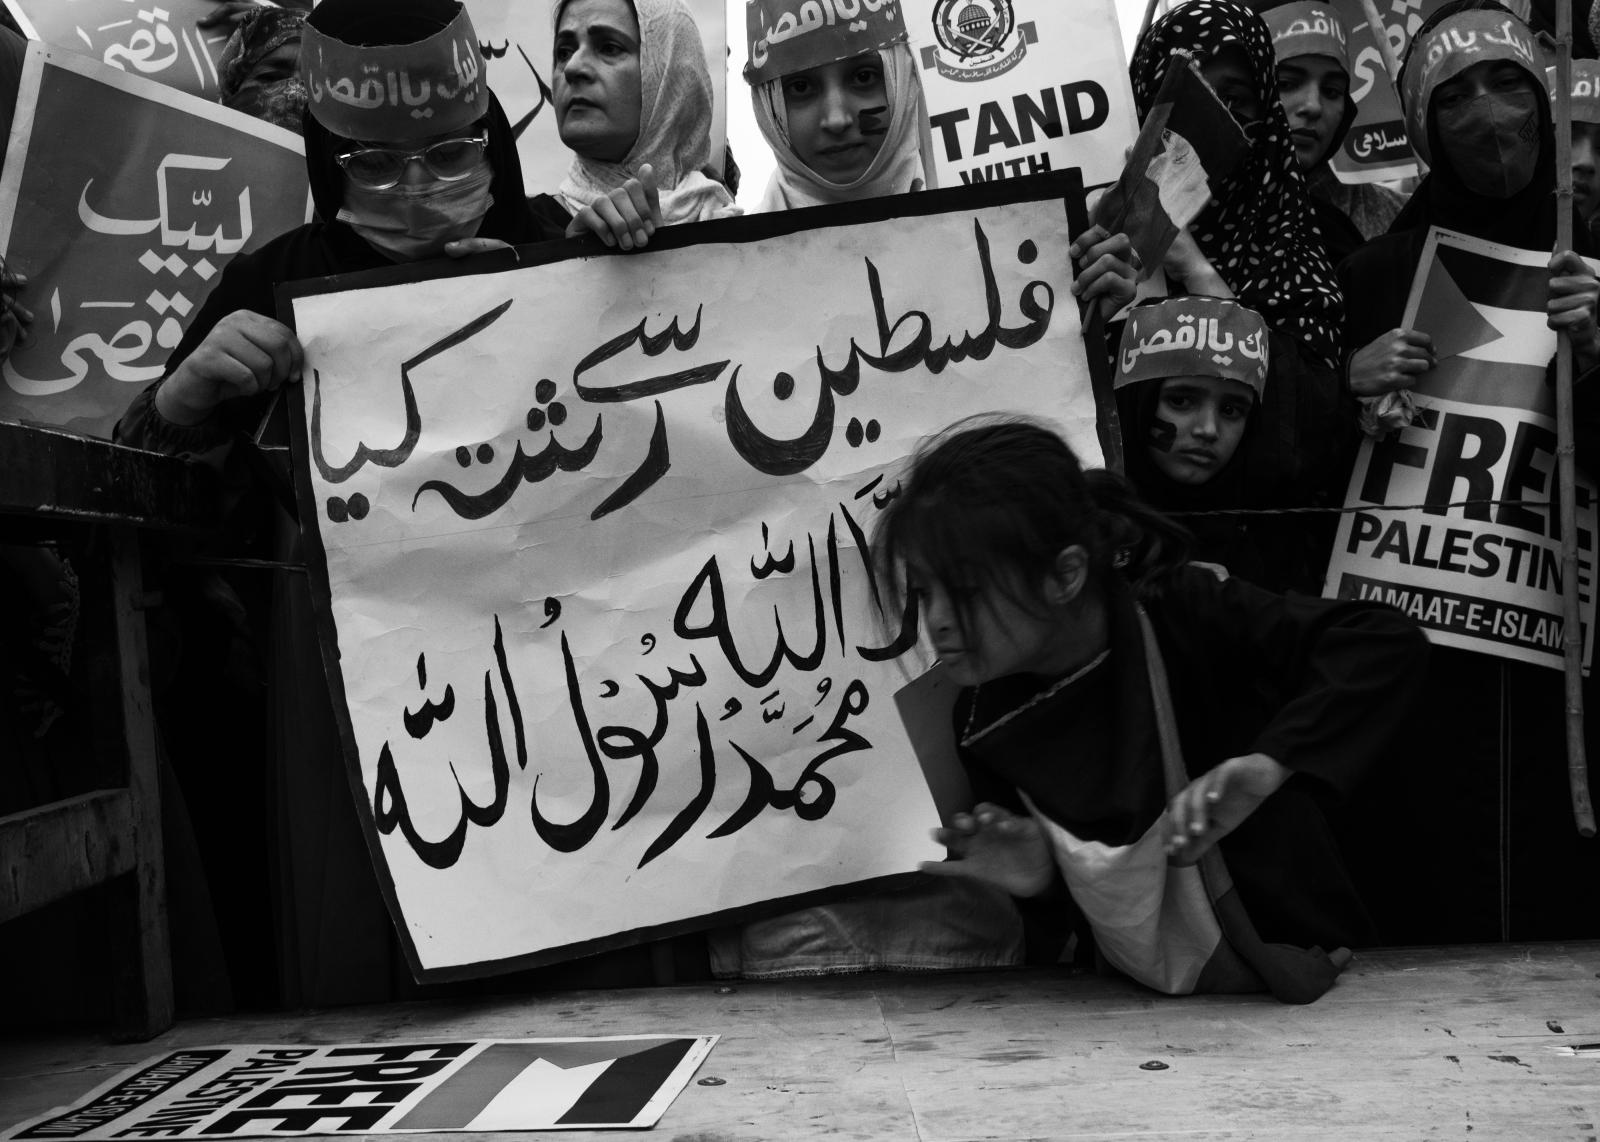 From the river to the sea - A girl takes a closer look at the placard during the protest held in solidarity with Palestine on...